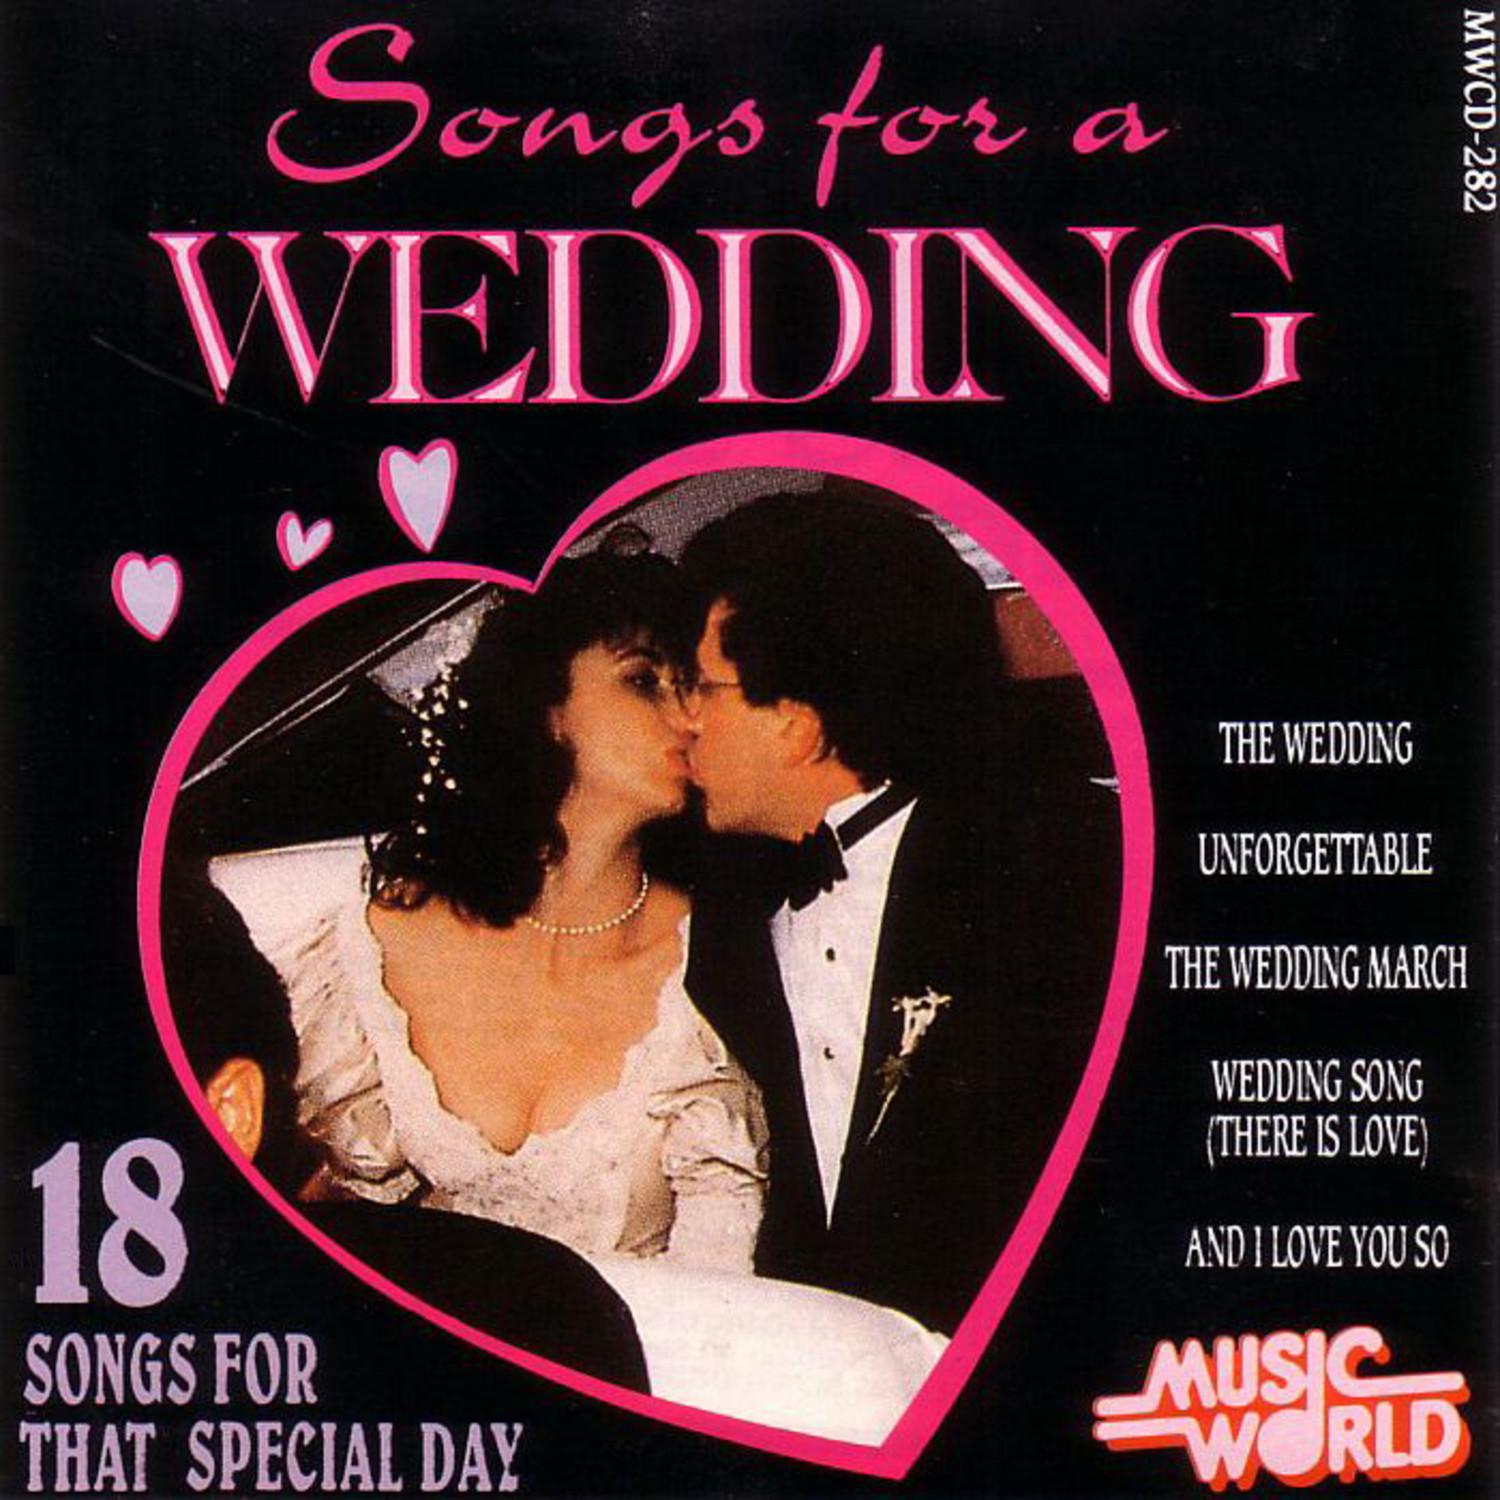 Songs For A Wedding - 18 Songs For That Special Day